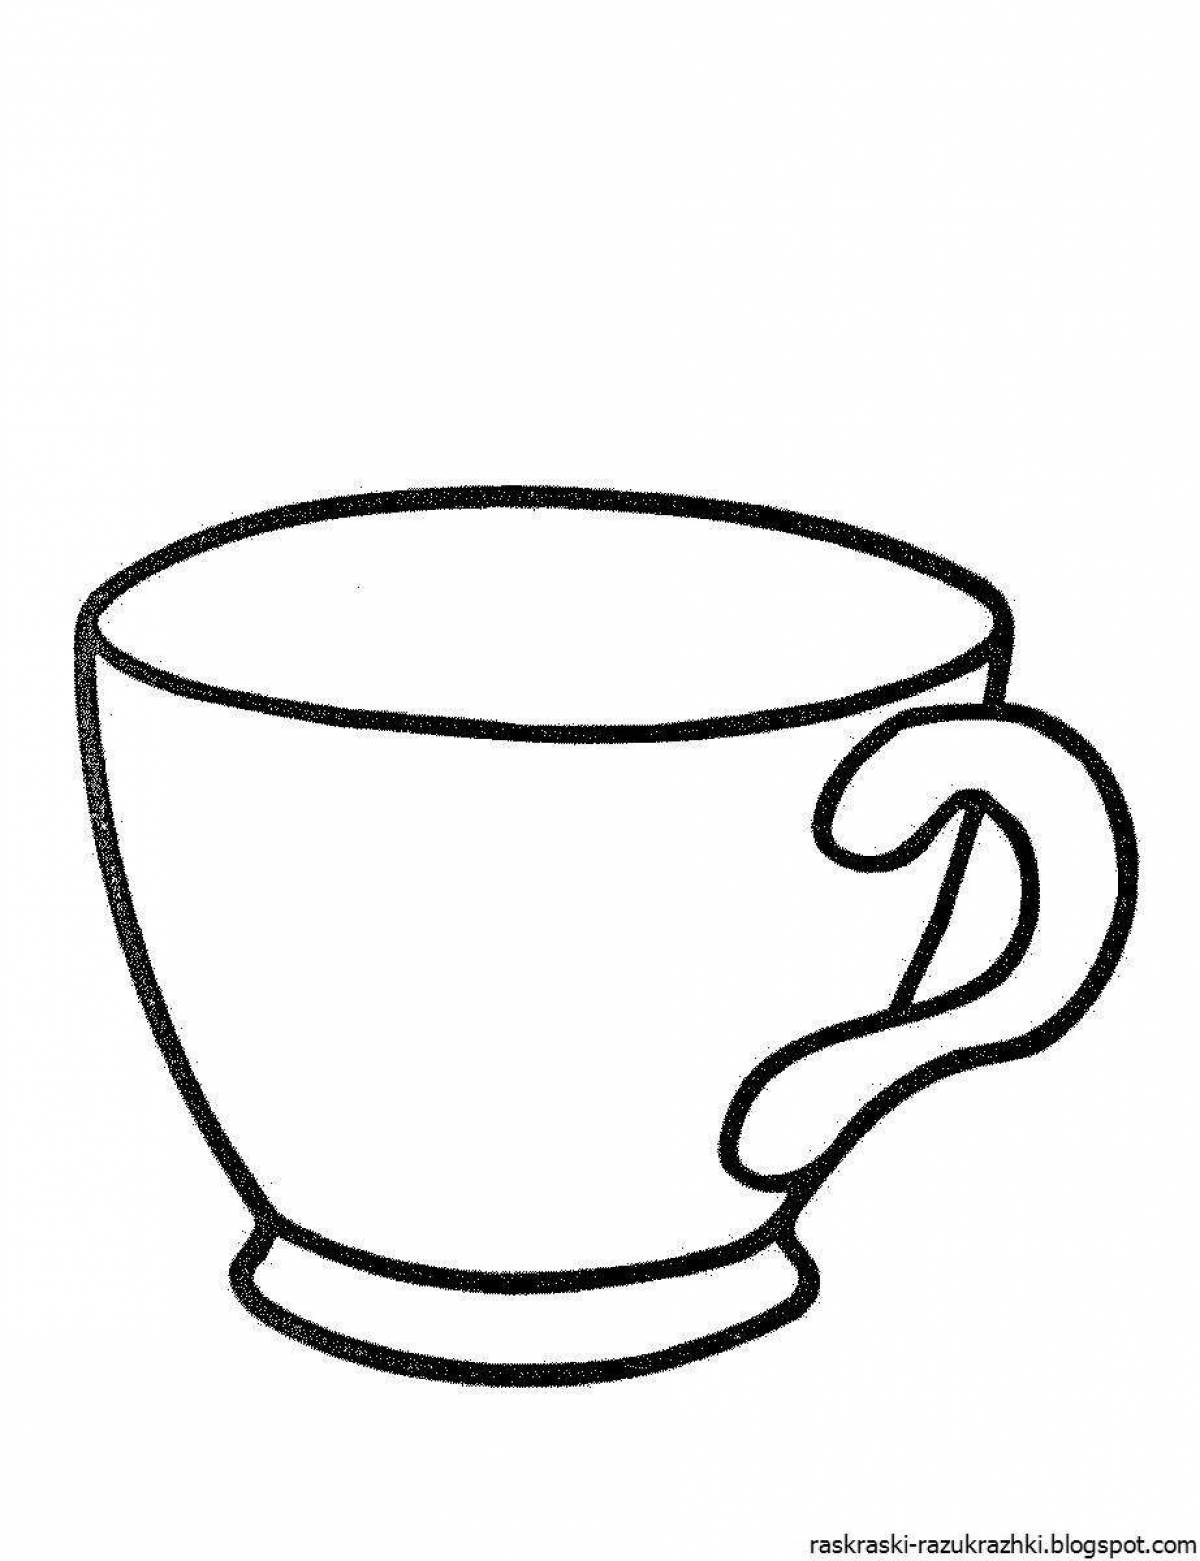 Wonderful cup and saucer coloring book for kids